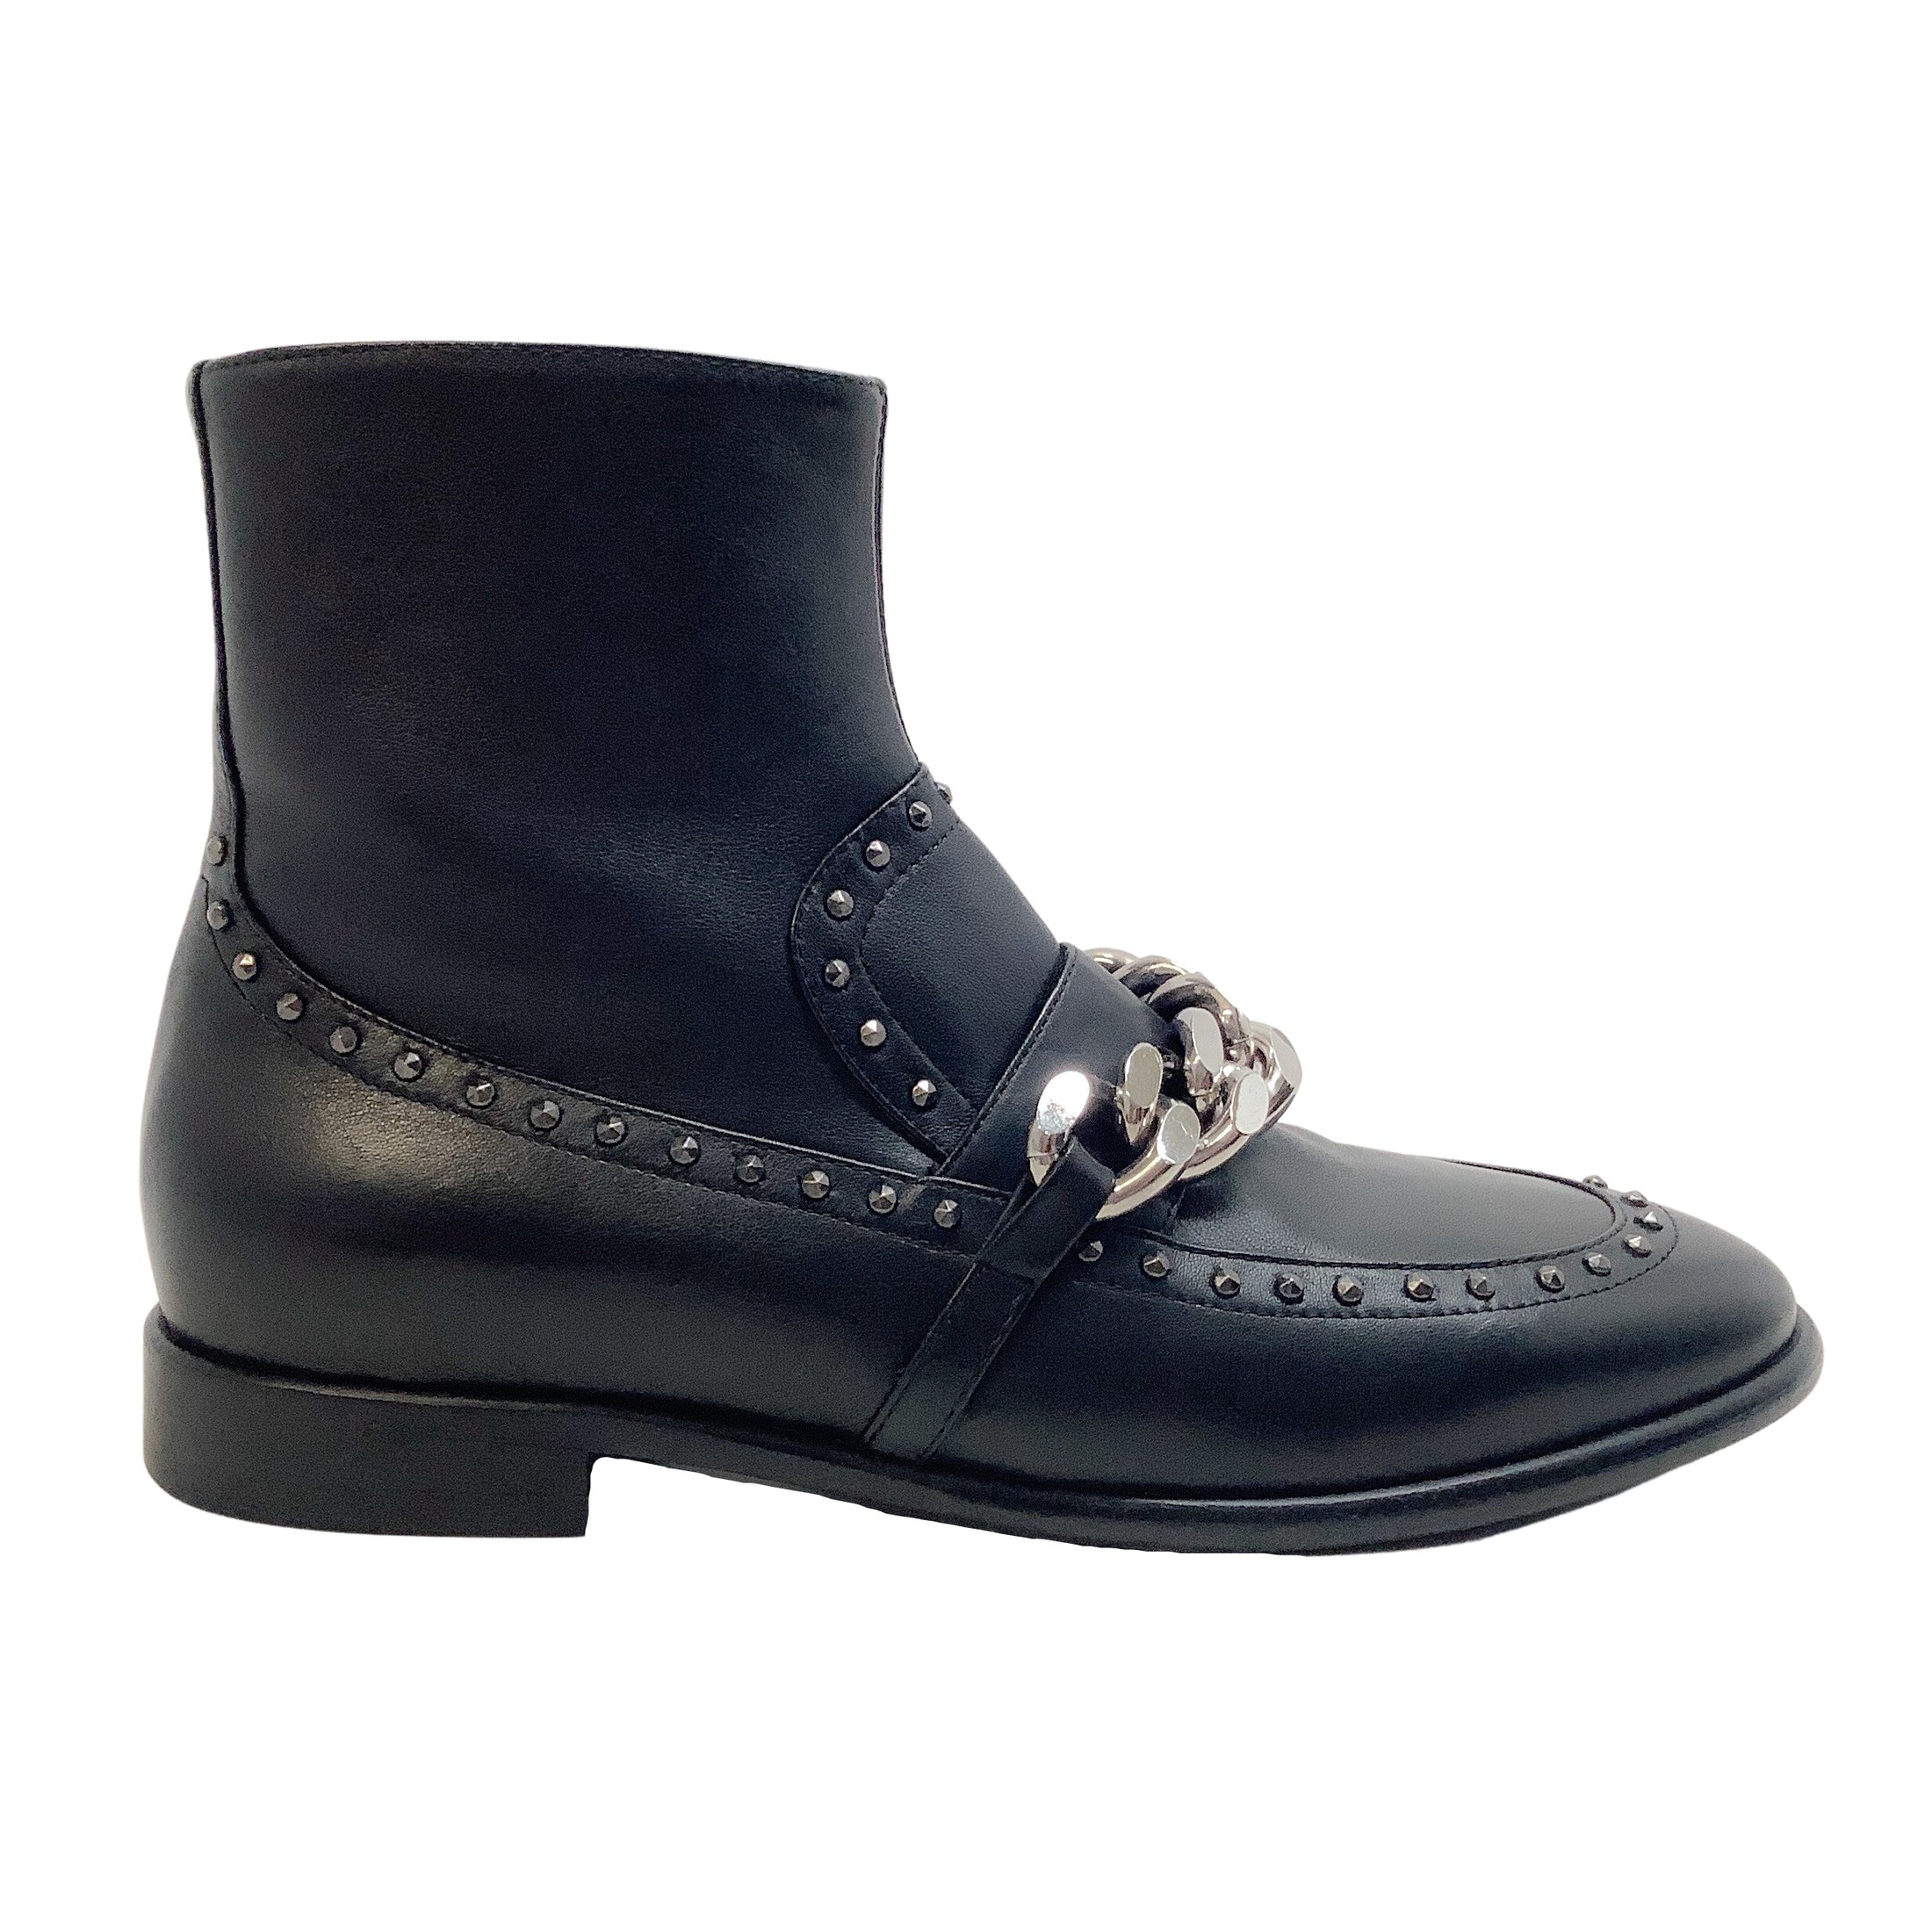 Casadei Black Leather Wingtip with Chain and Stud Detail Boots/Booties